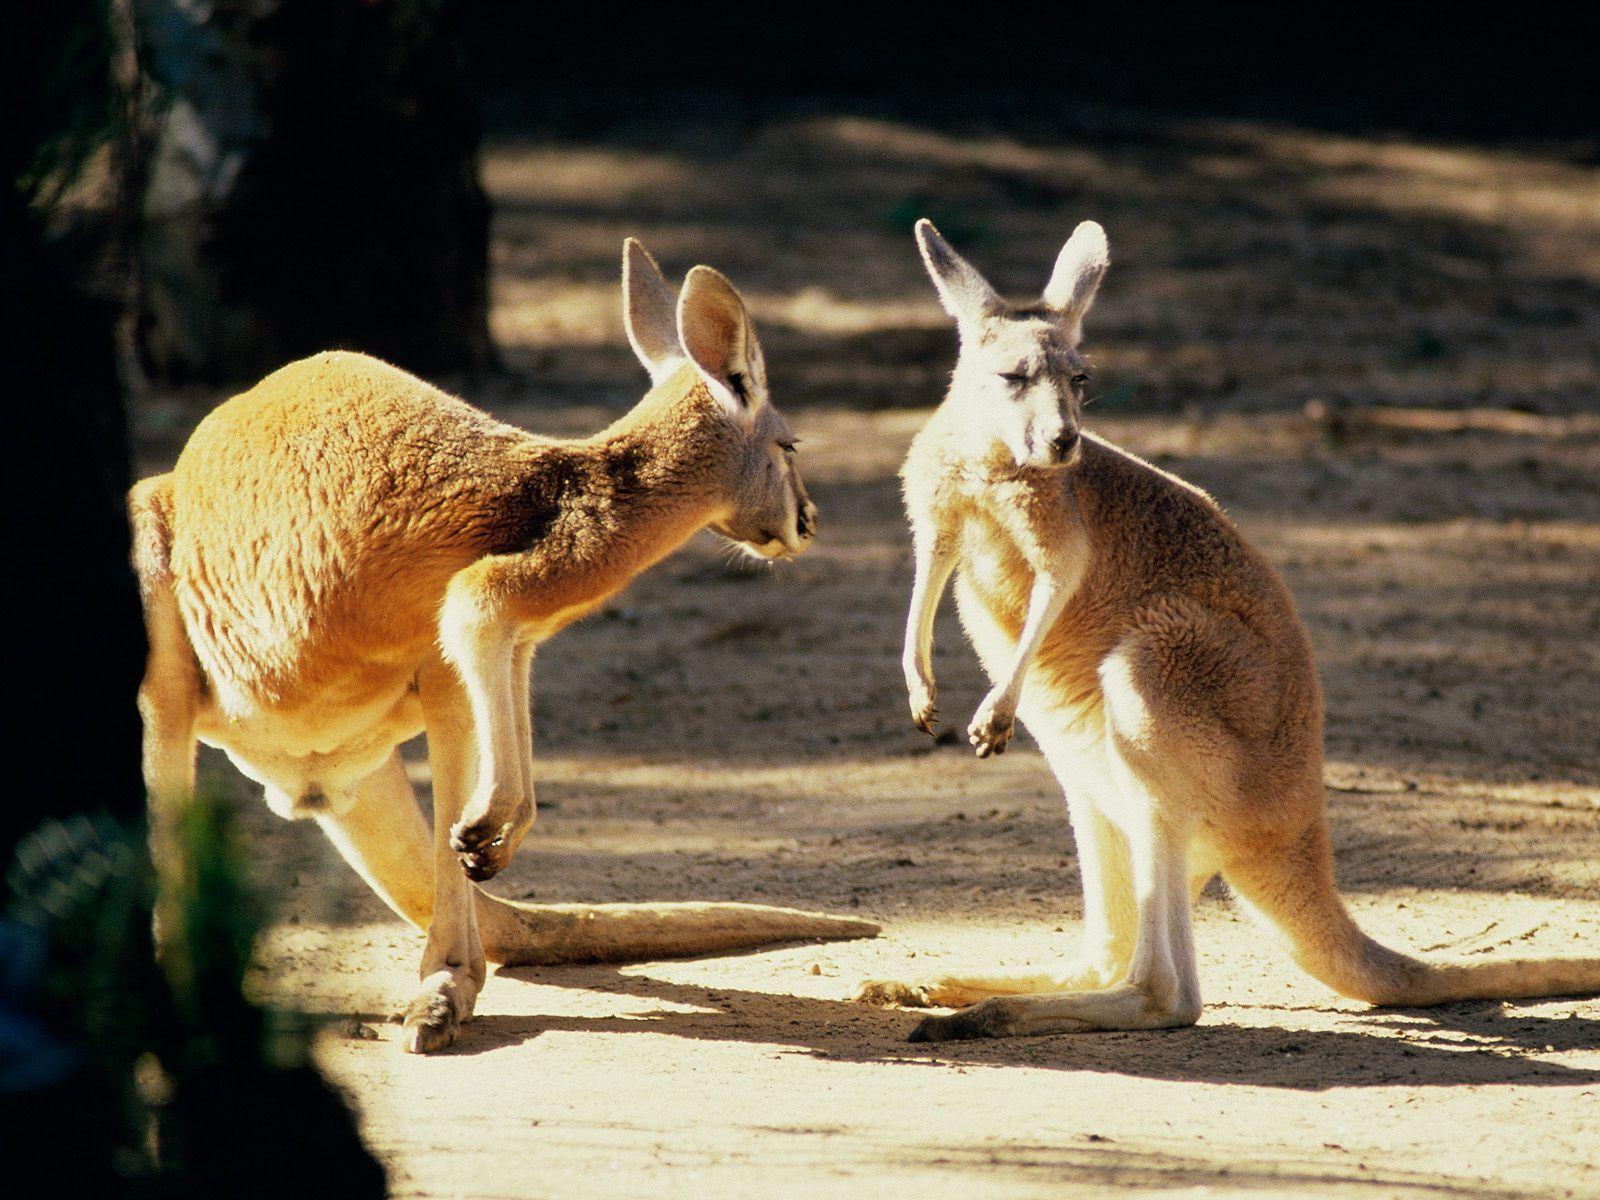 Click here to download in HD Format >> Kangaroo Conversation